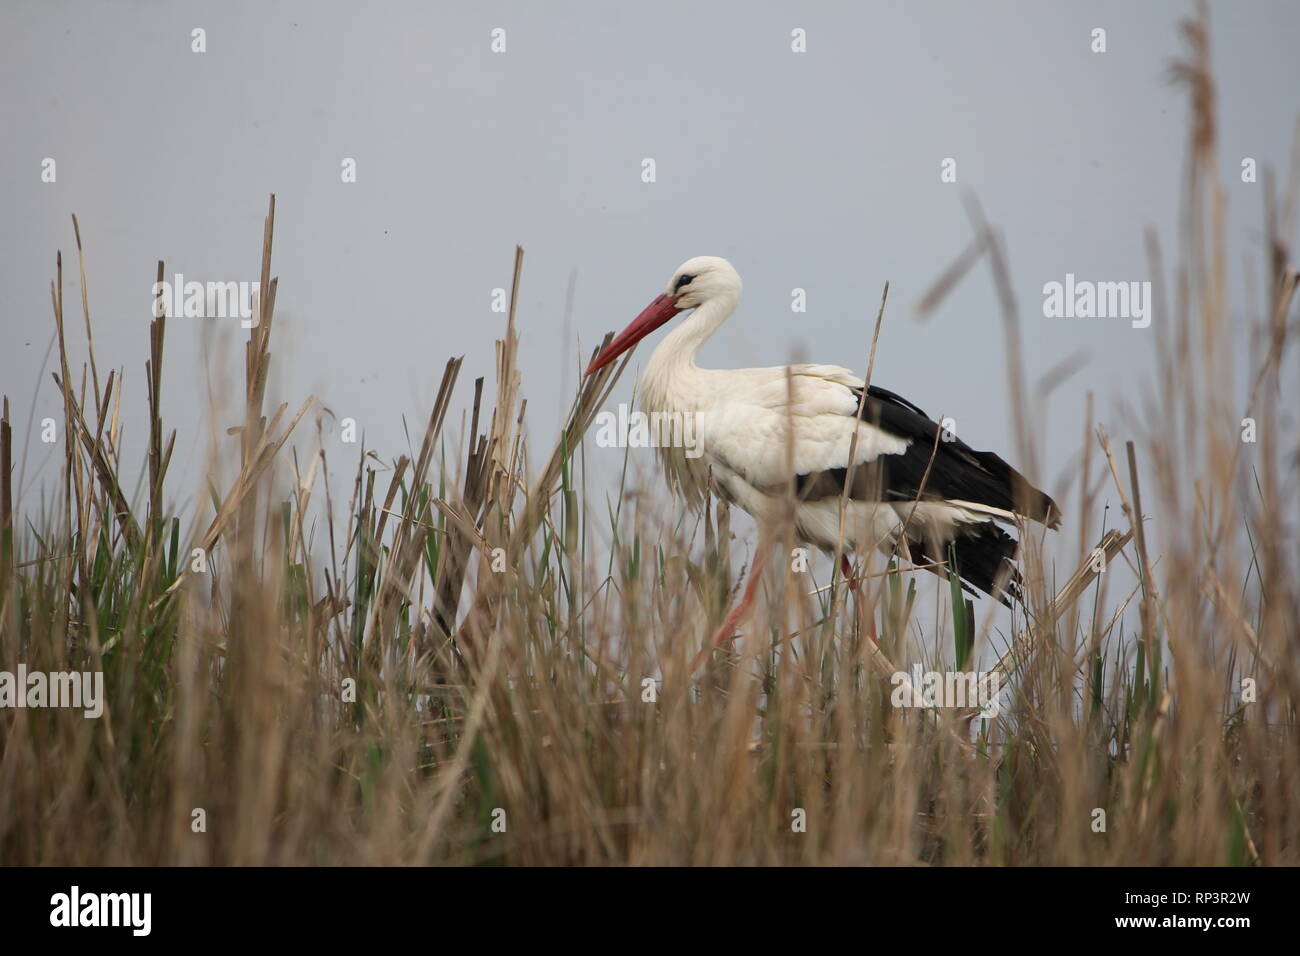 A White Stork (Ciconia ciconia) walking for prey in a wetland near Muenster, Germany. Stock Photo